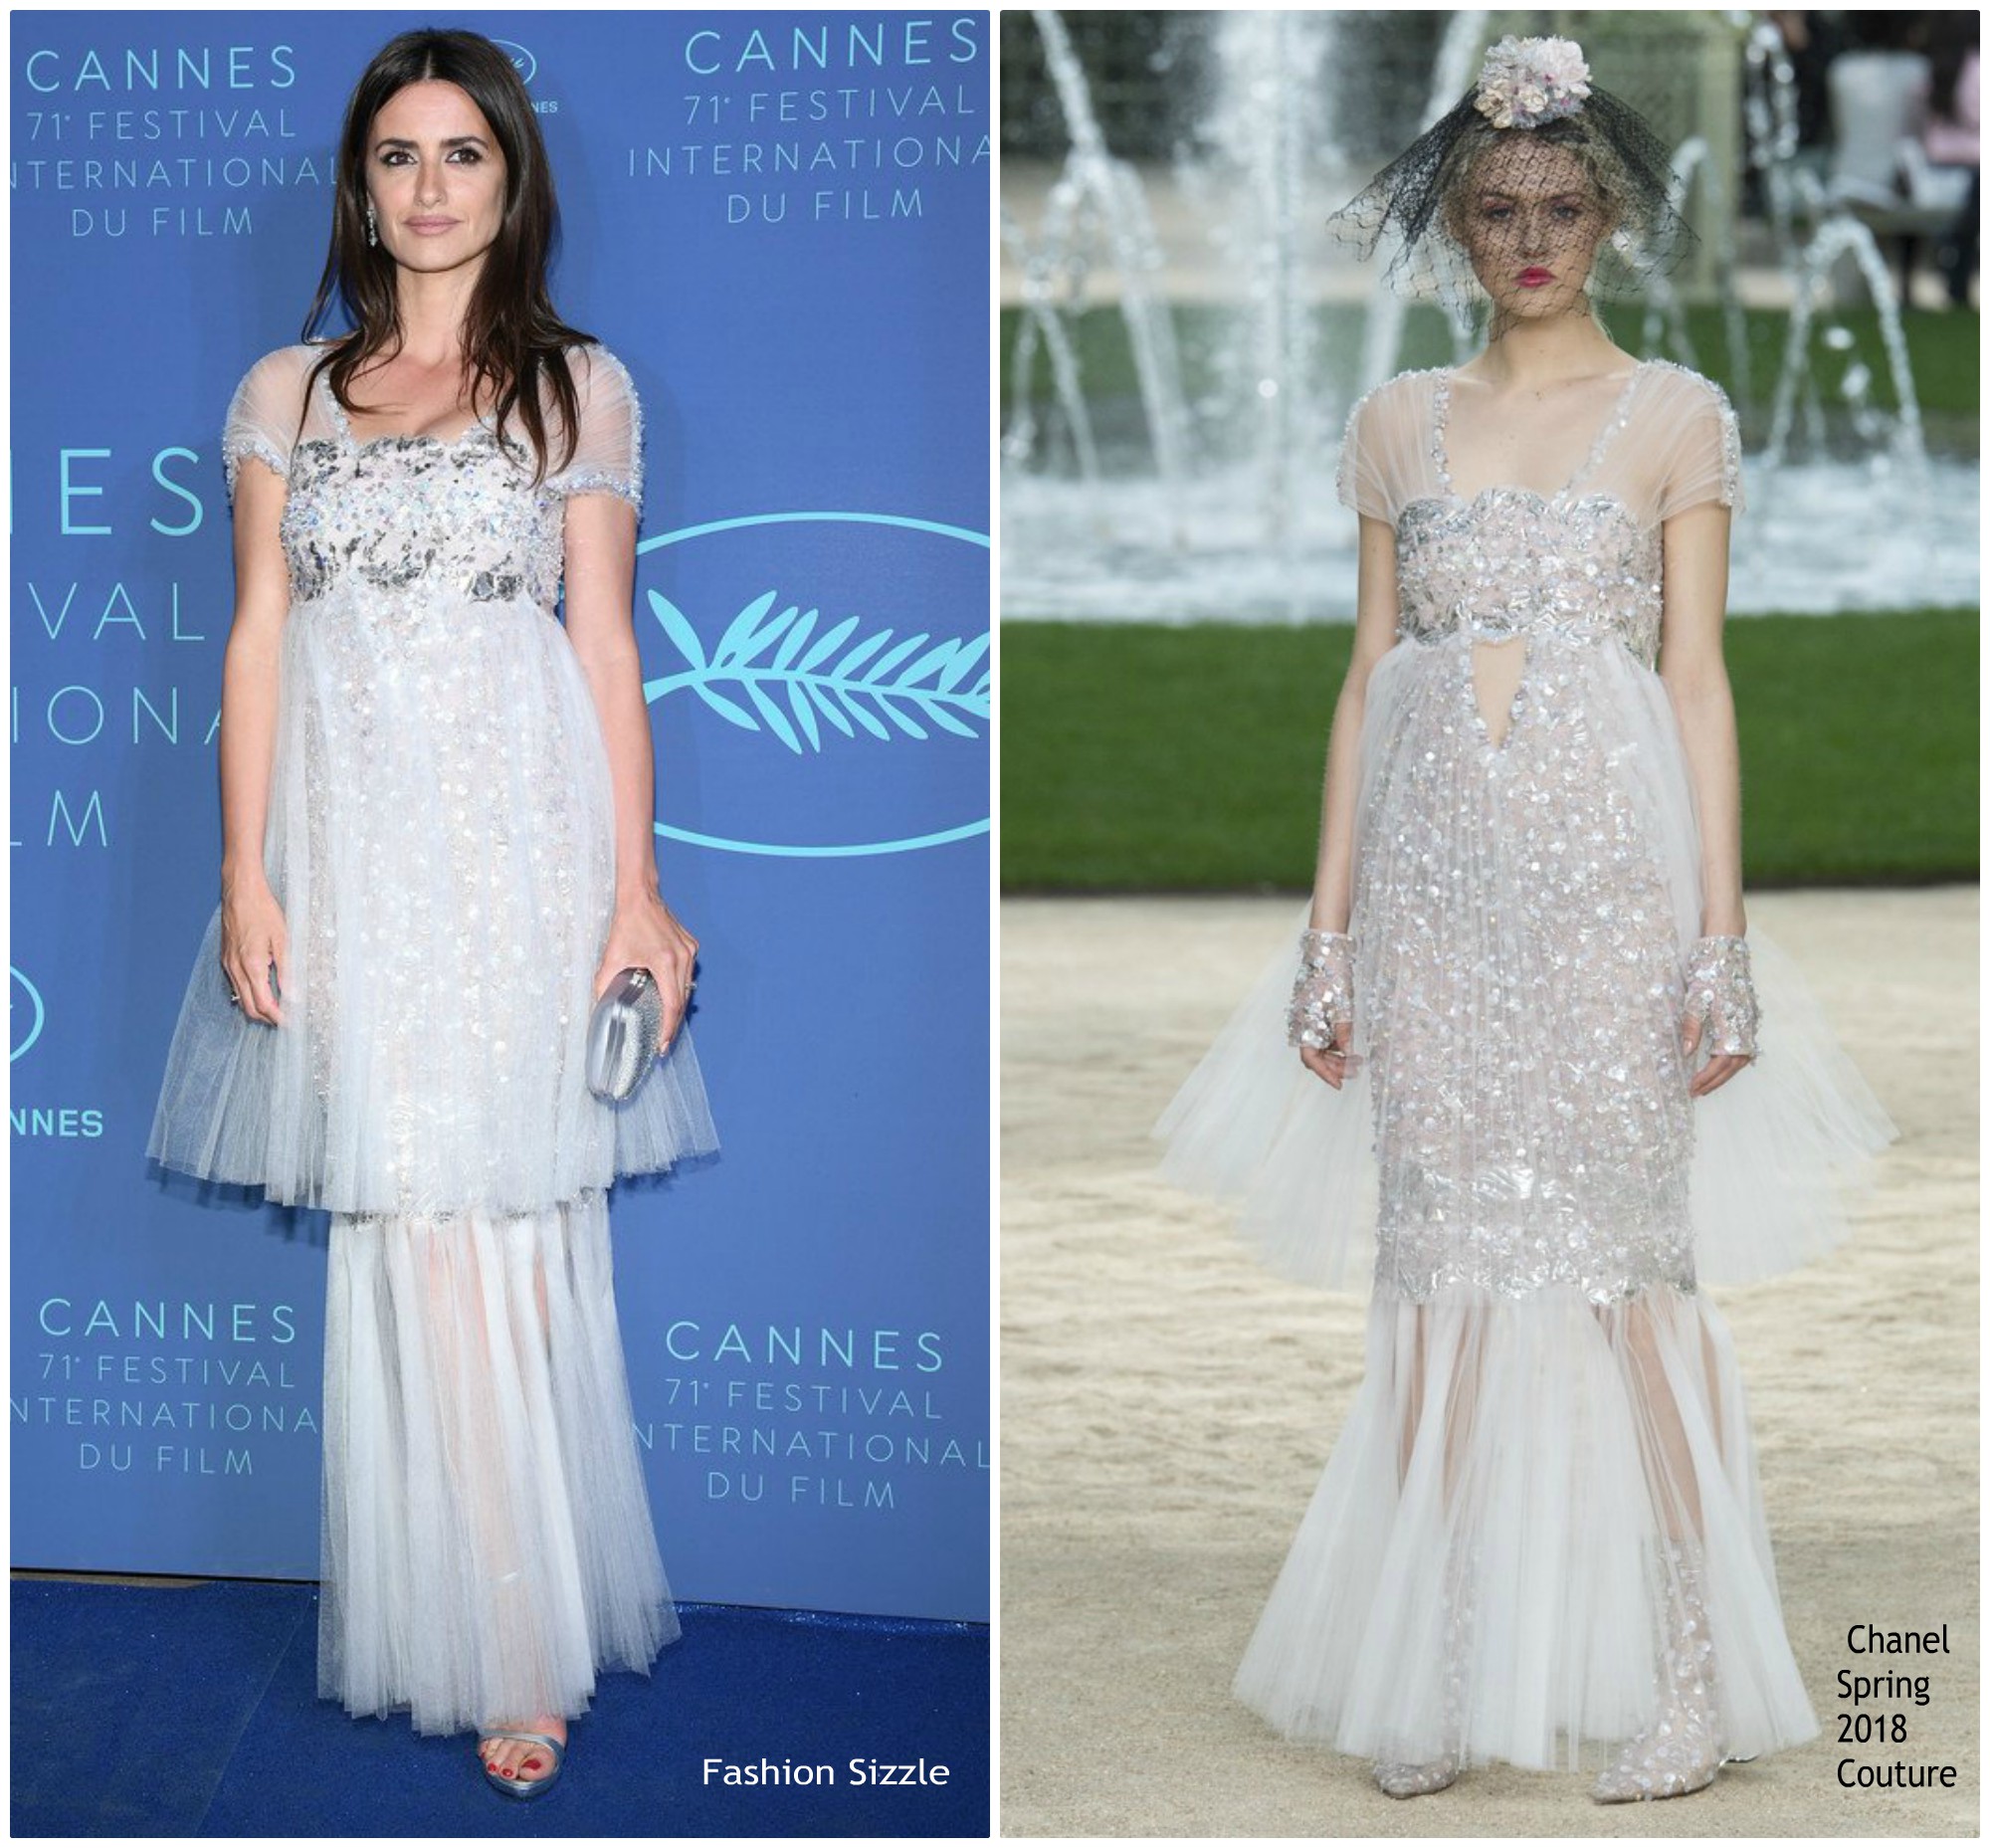 penelope-cruz-in-chanel-couture-cannes-film-festival-gala-dinner